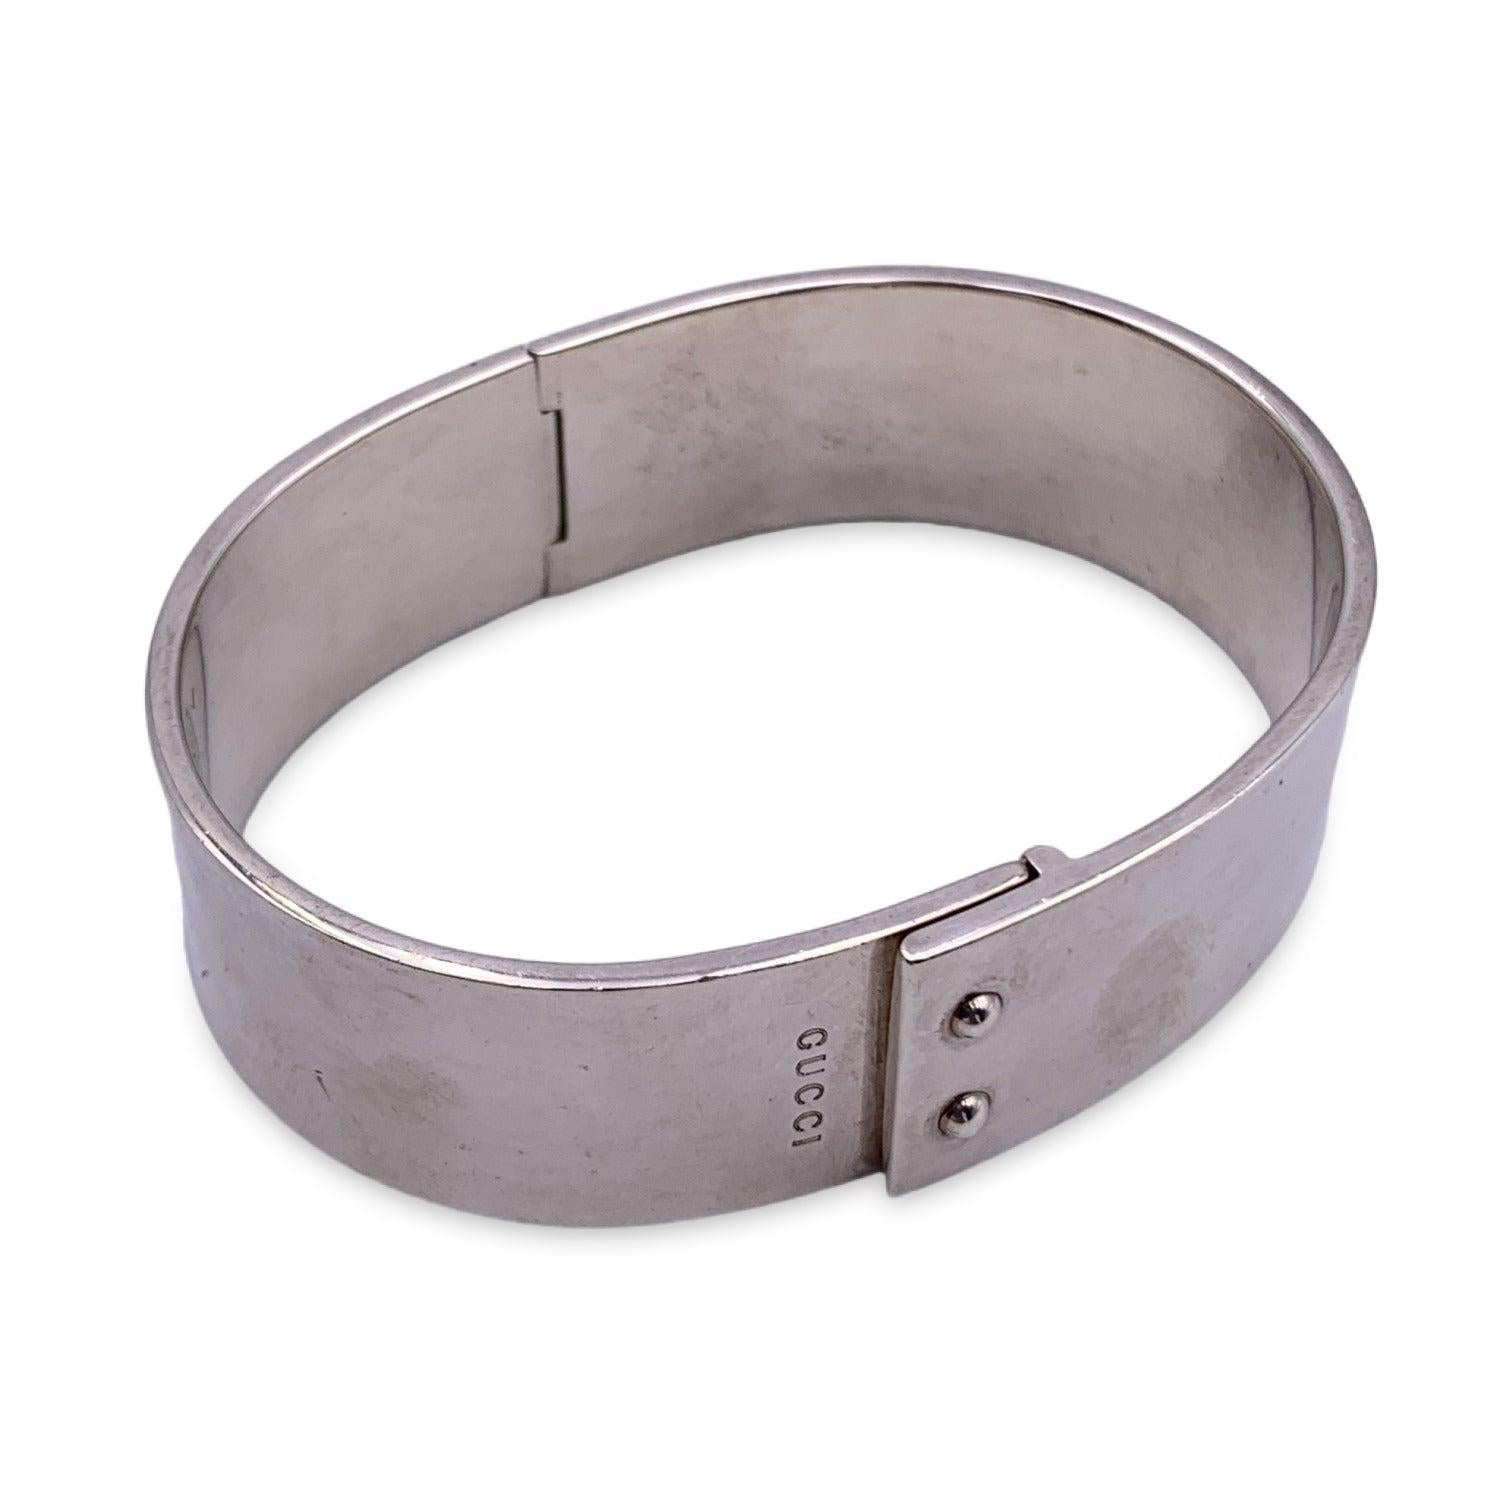 Vintage bangle bracelet by Gucci. Made in sterling silver. 'Gucci' , 'Made in Italy' and '925' hallmark engraved on the bracelet. Internal circumference: 7 inches - 17.8 cm Condition A - EXCELLENT Gently used. Very light superficial scratches on the